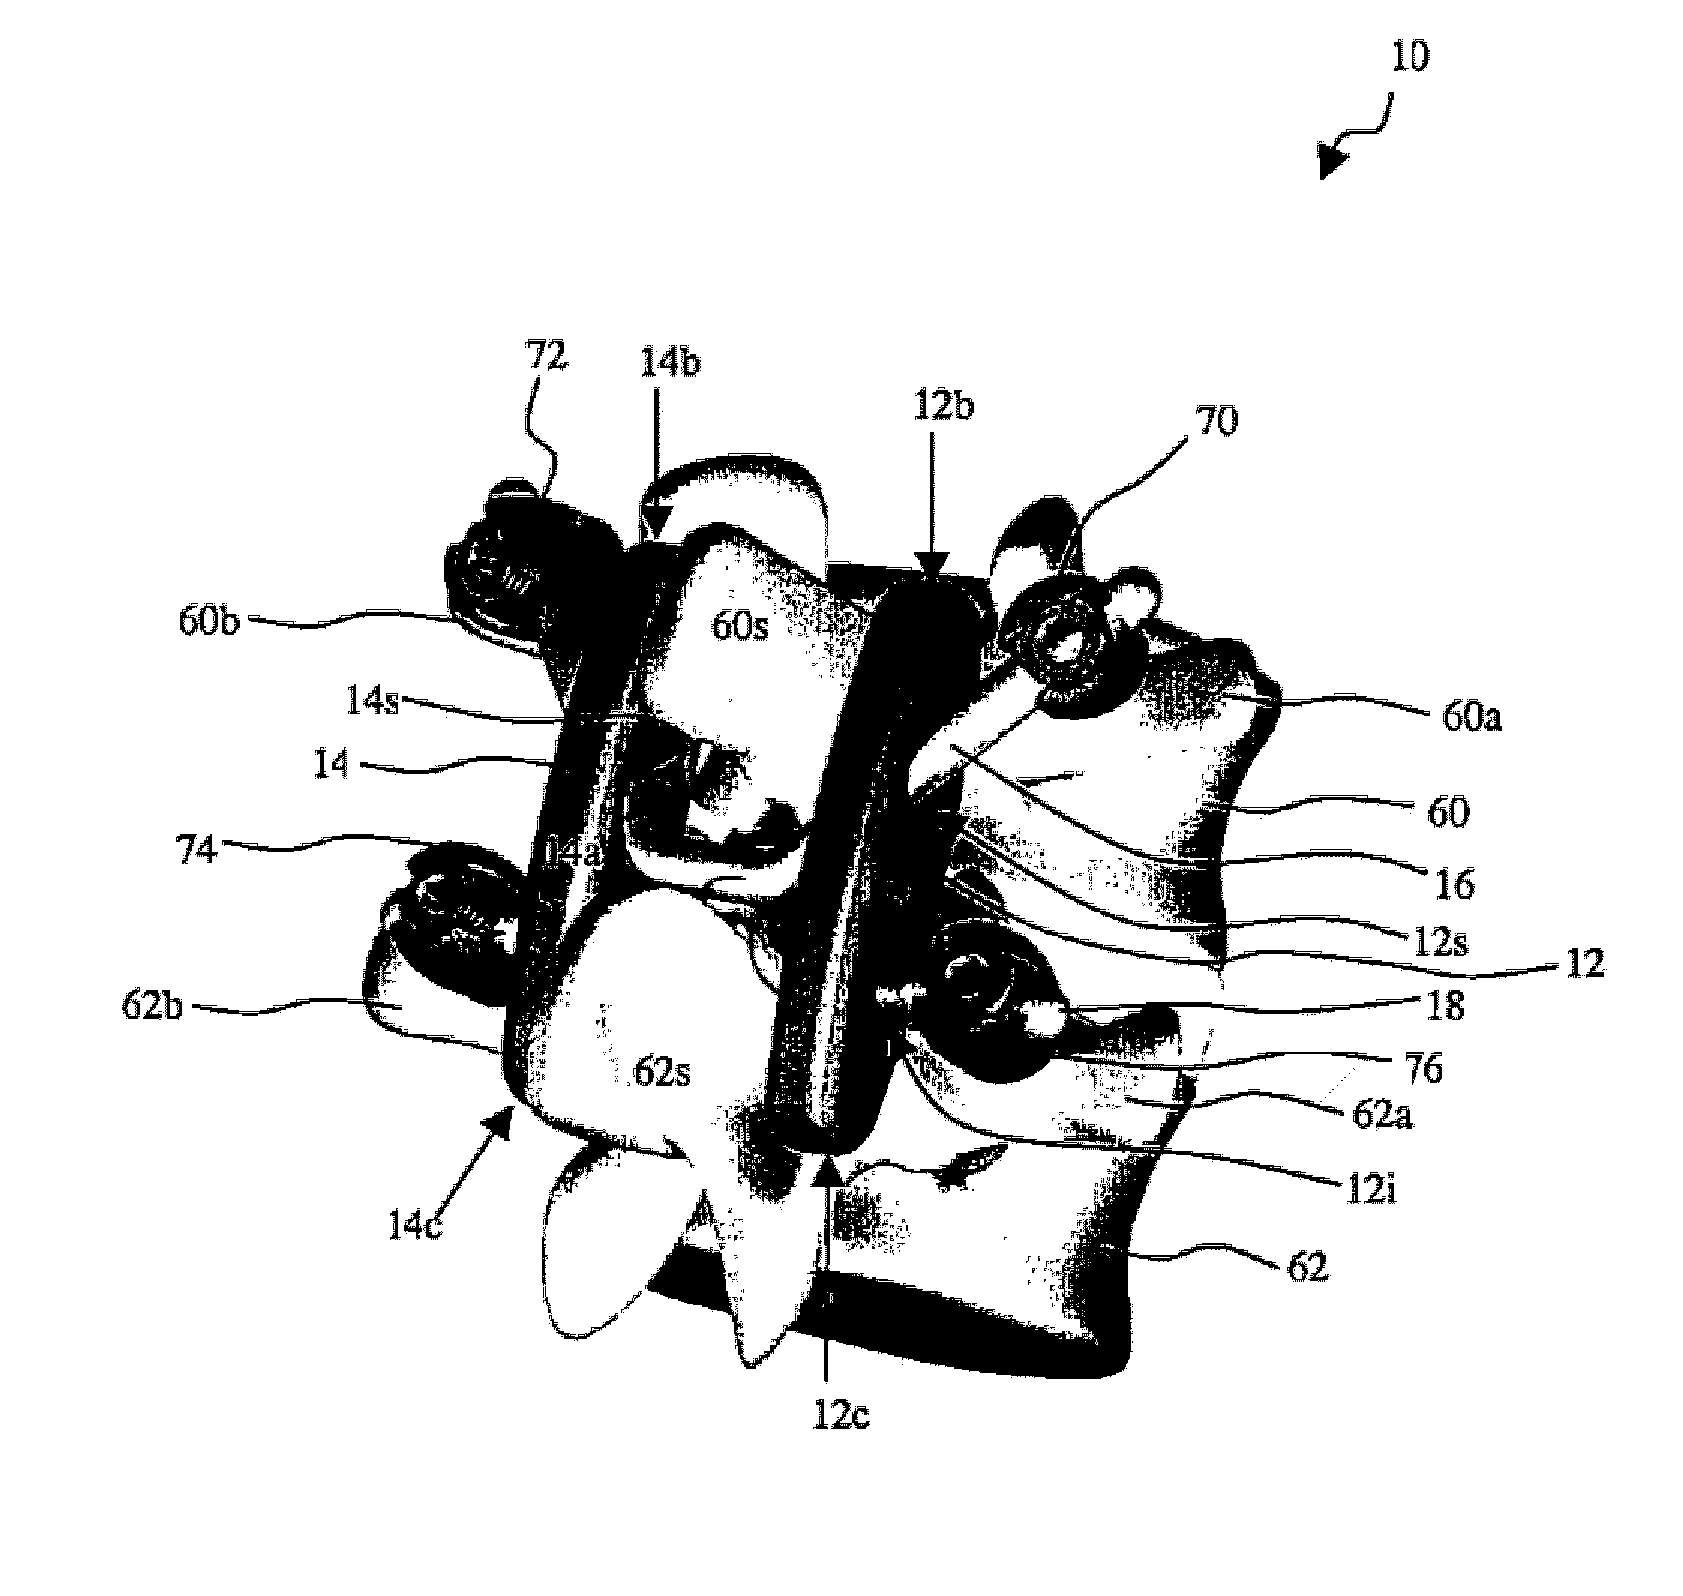 Posterior dynamic stabilizer devices